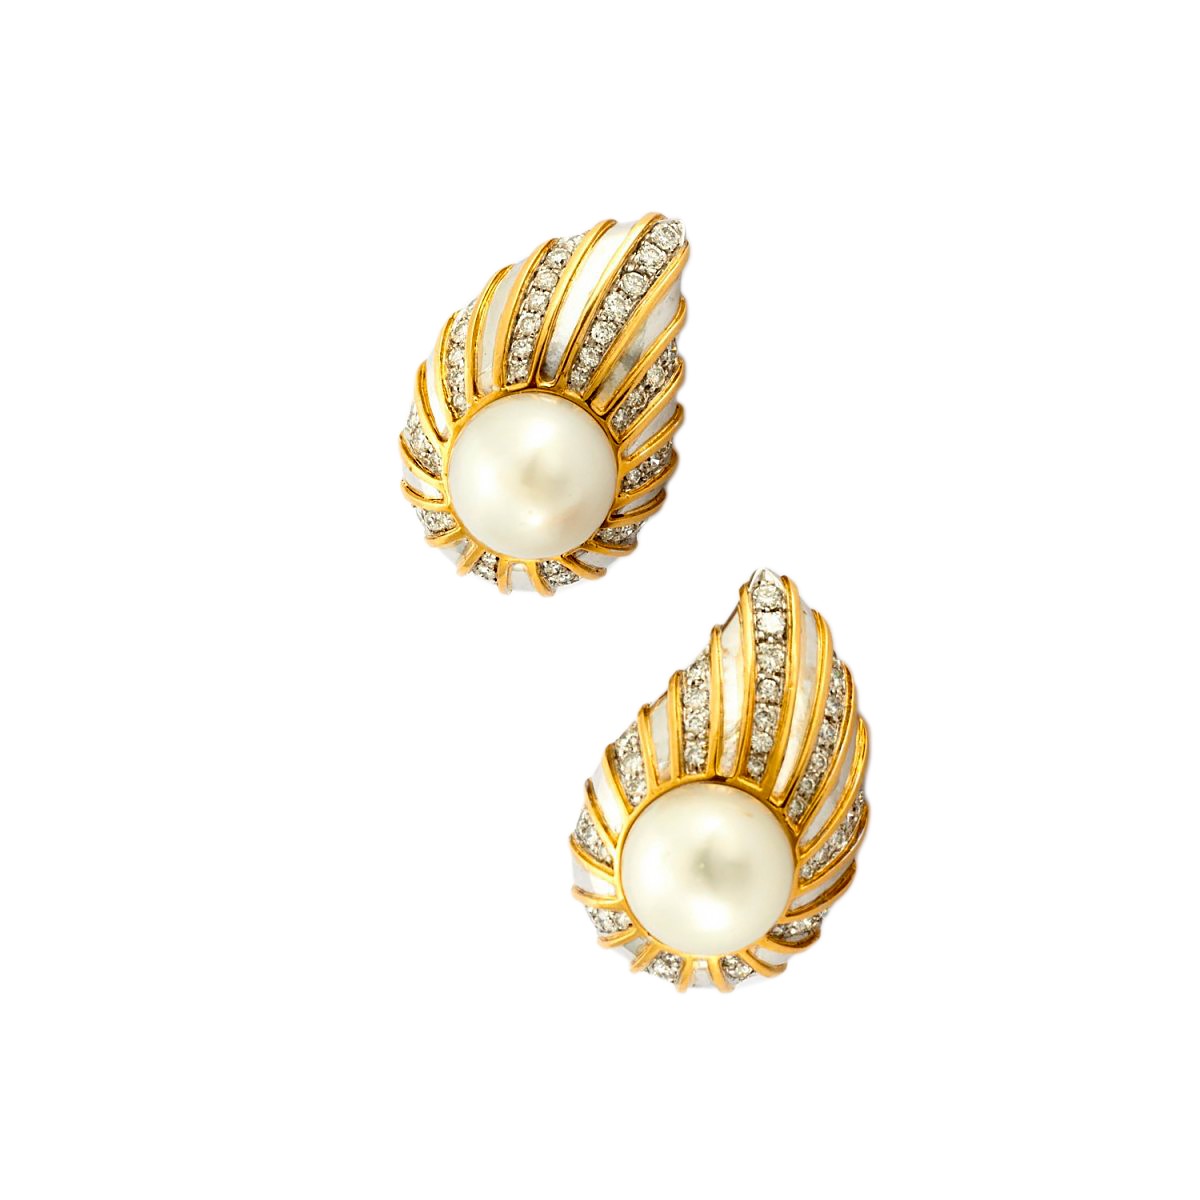 REPOSSI - Gold diamonds and south sea pearls earrings - Ref.108730